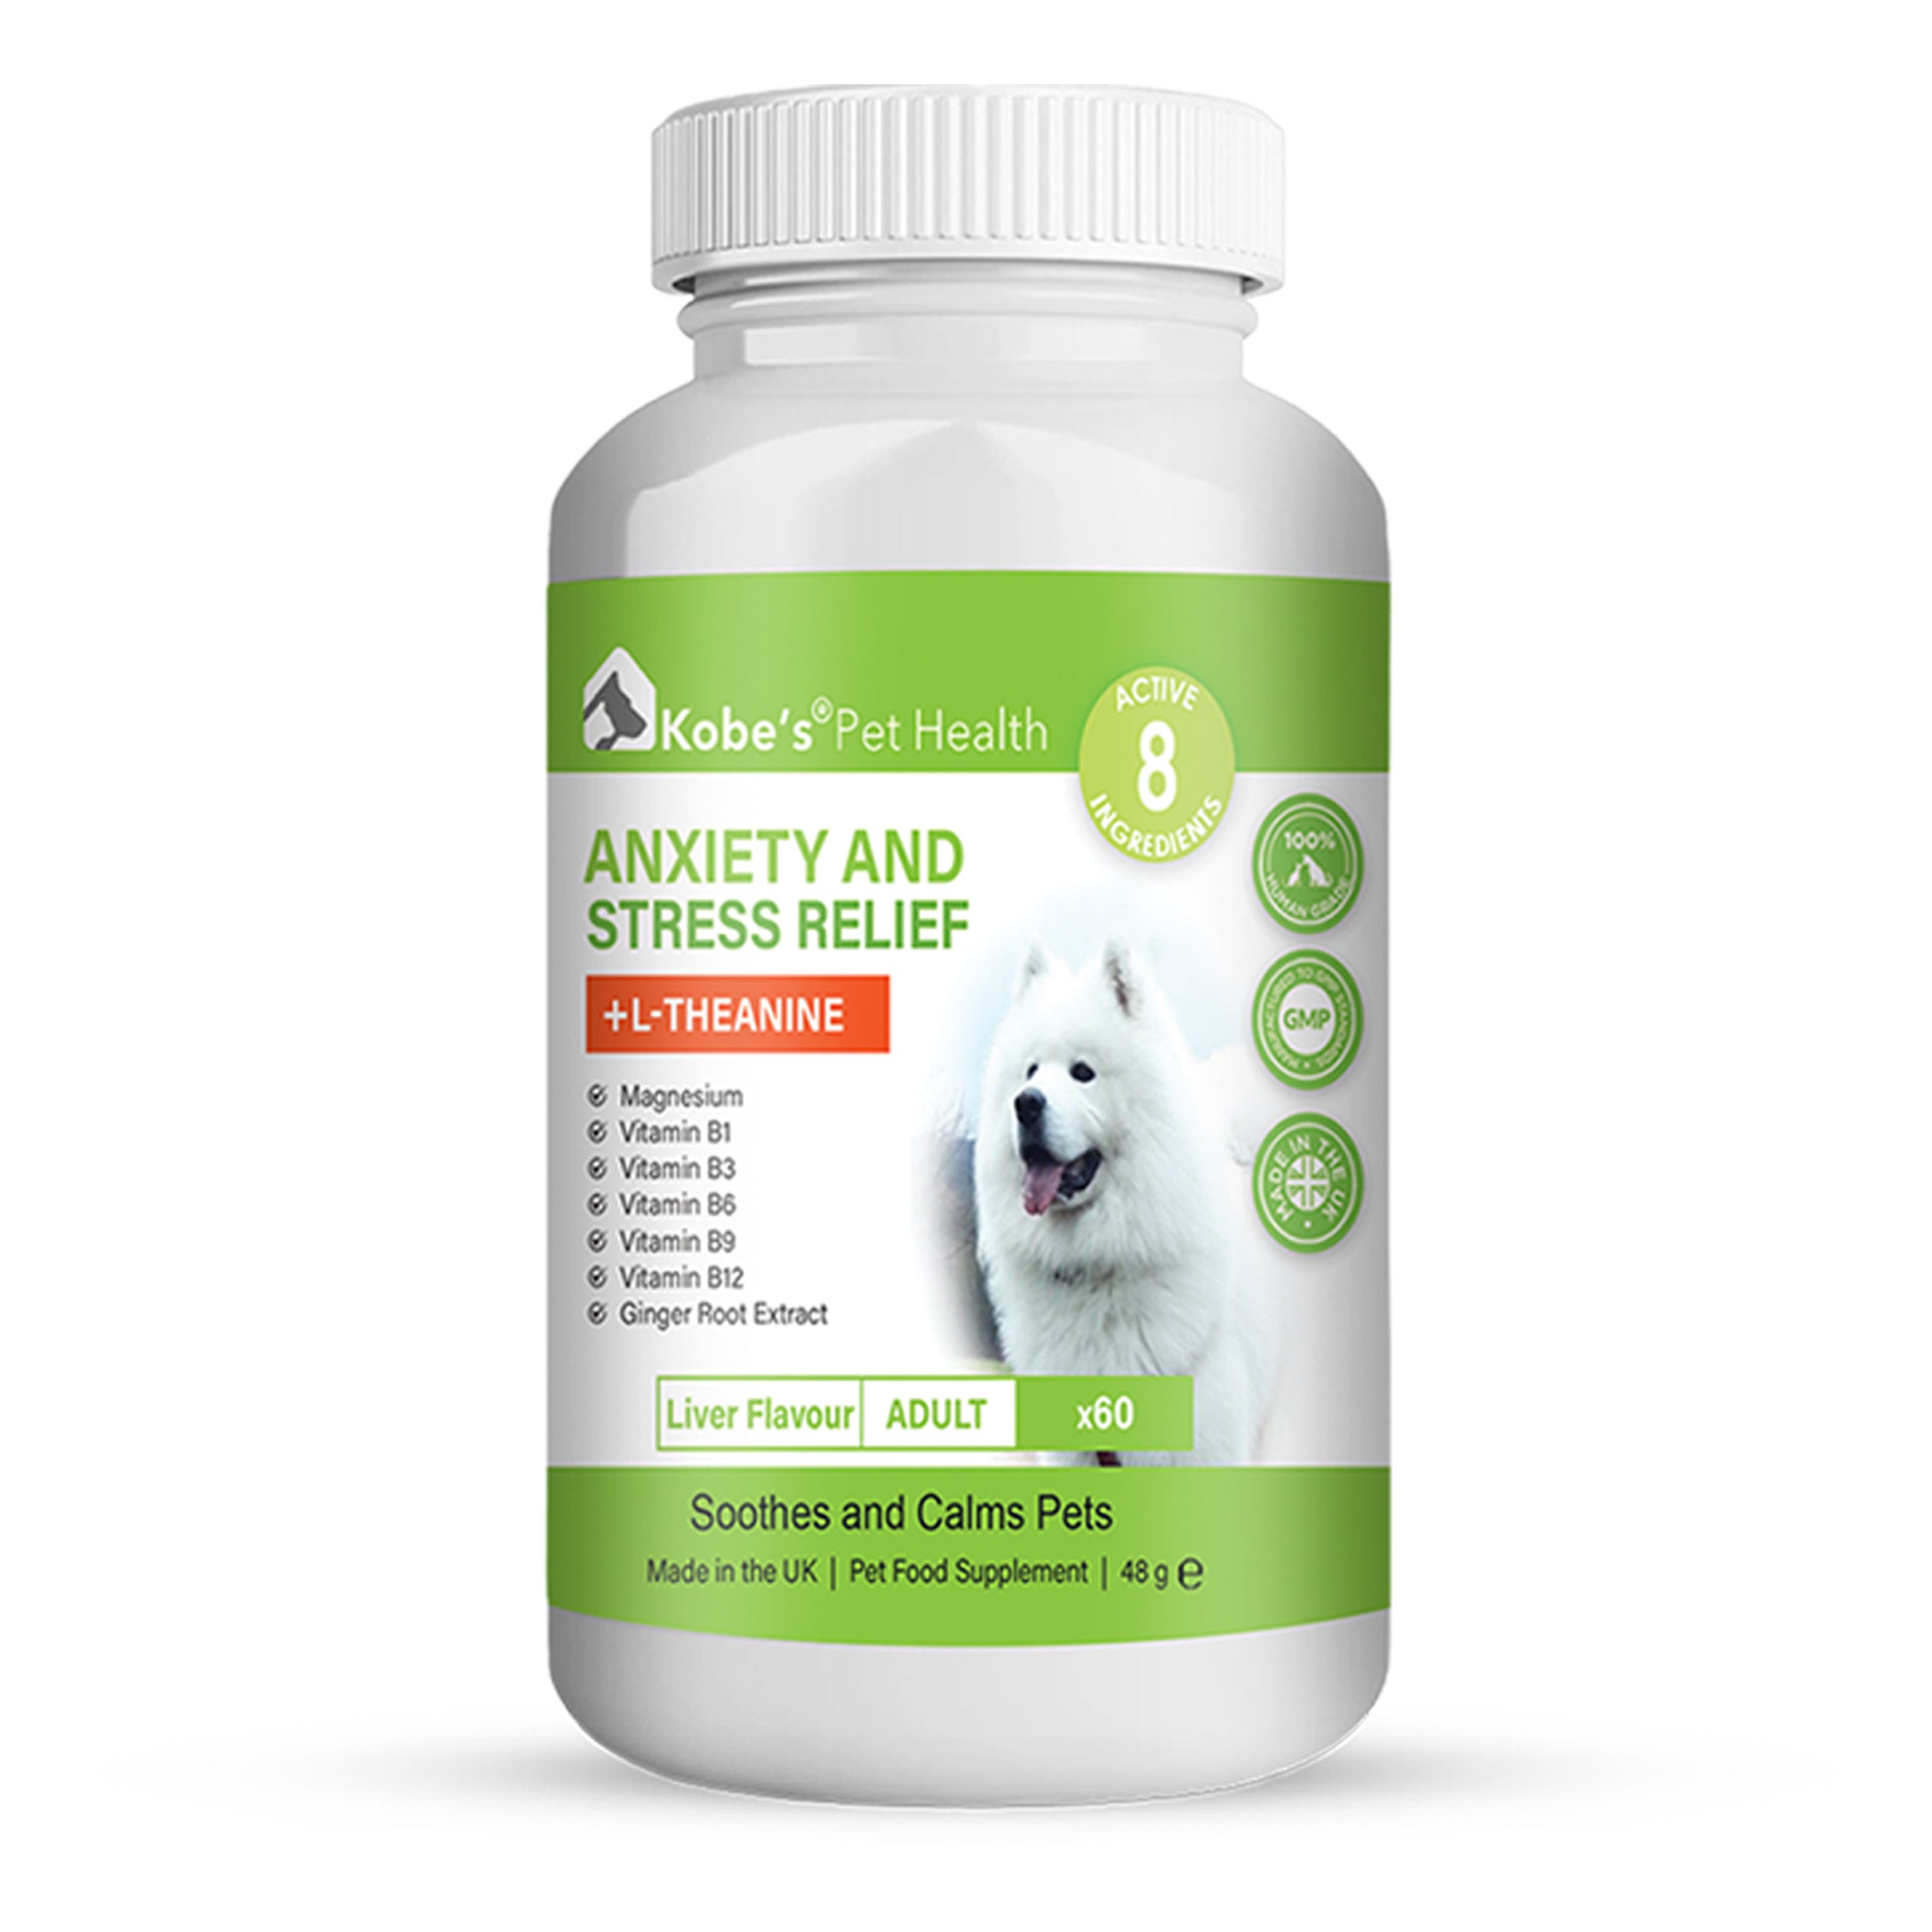 Natural calming pills for dogs | Calming aids for hyper dogs | Anxiety and stress relief - 60 Capsules (Trial)